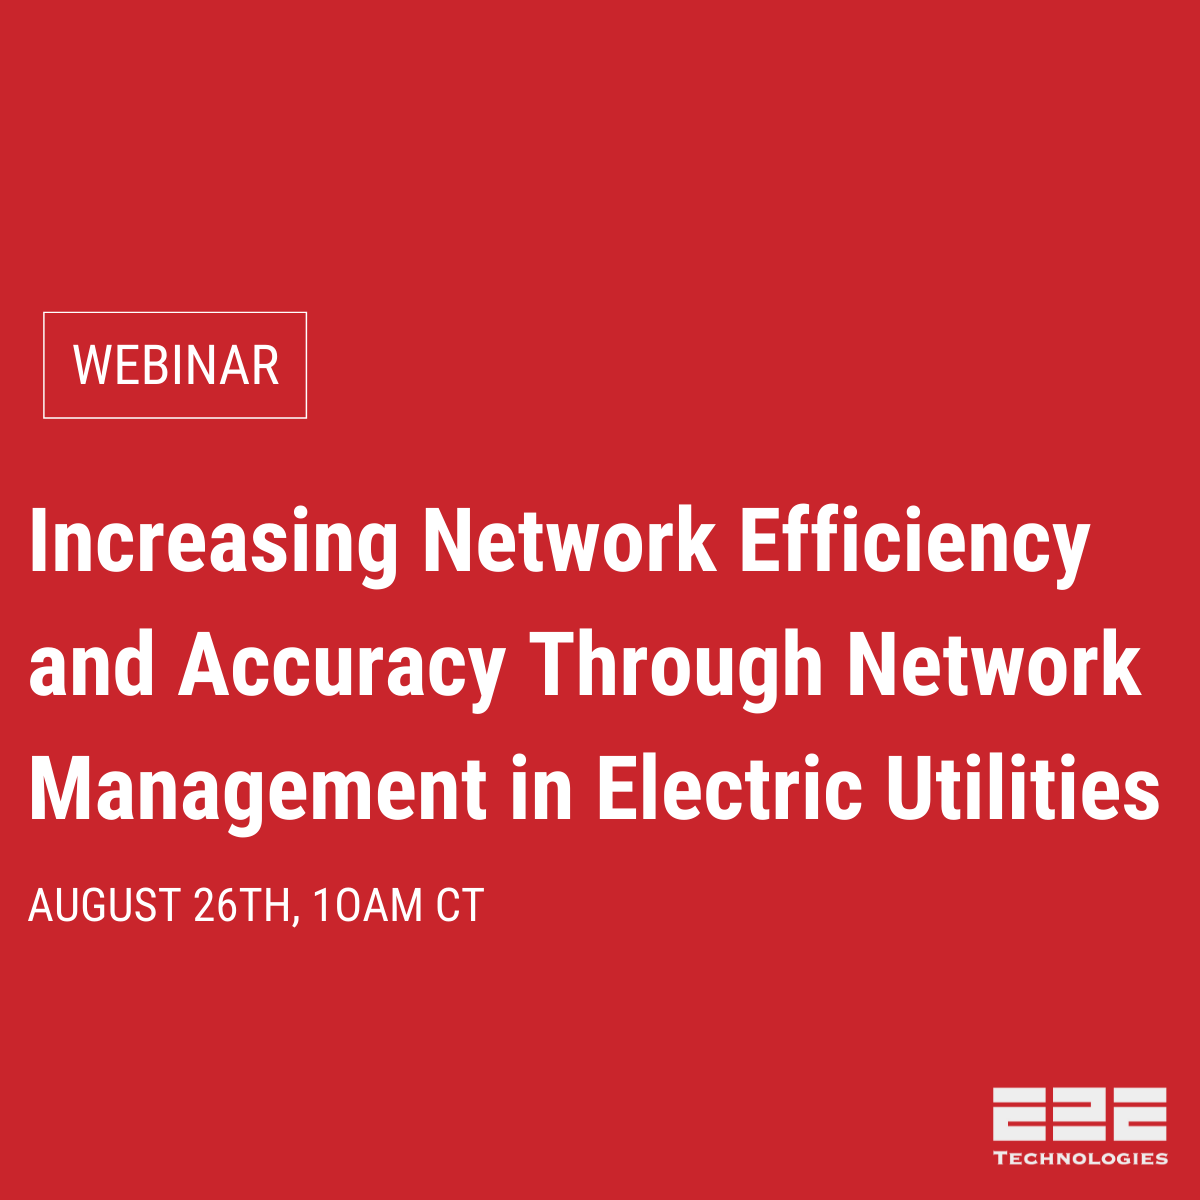 Increasing Network Efficiency and Accuracy Through Network Management in Electric Utilities